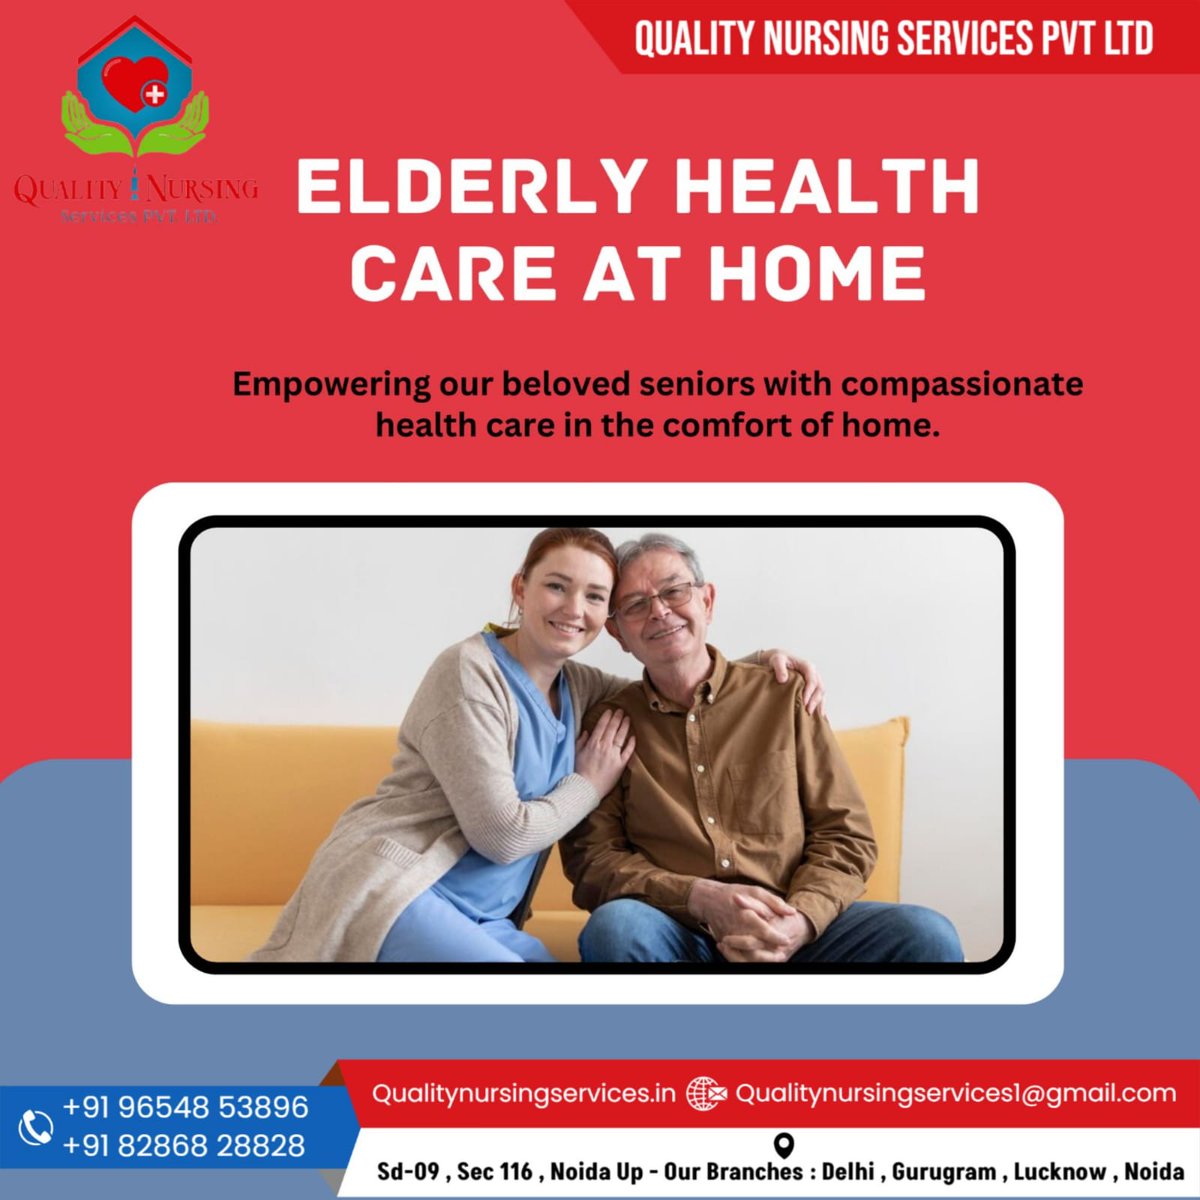 🌟Embracing the golden years with dignity and comfort, Elder Health Care At Home. 🏡💖

828-6-828-828
qualityelderhomes@gmail.com
qualityelderhomes.com

#ElderHealthCare #CareAtHome
#CherishTheElders #ElderHealthCare #QualityElderHome #SupportiveCare #Nursing